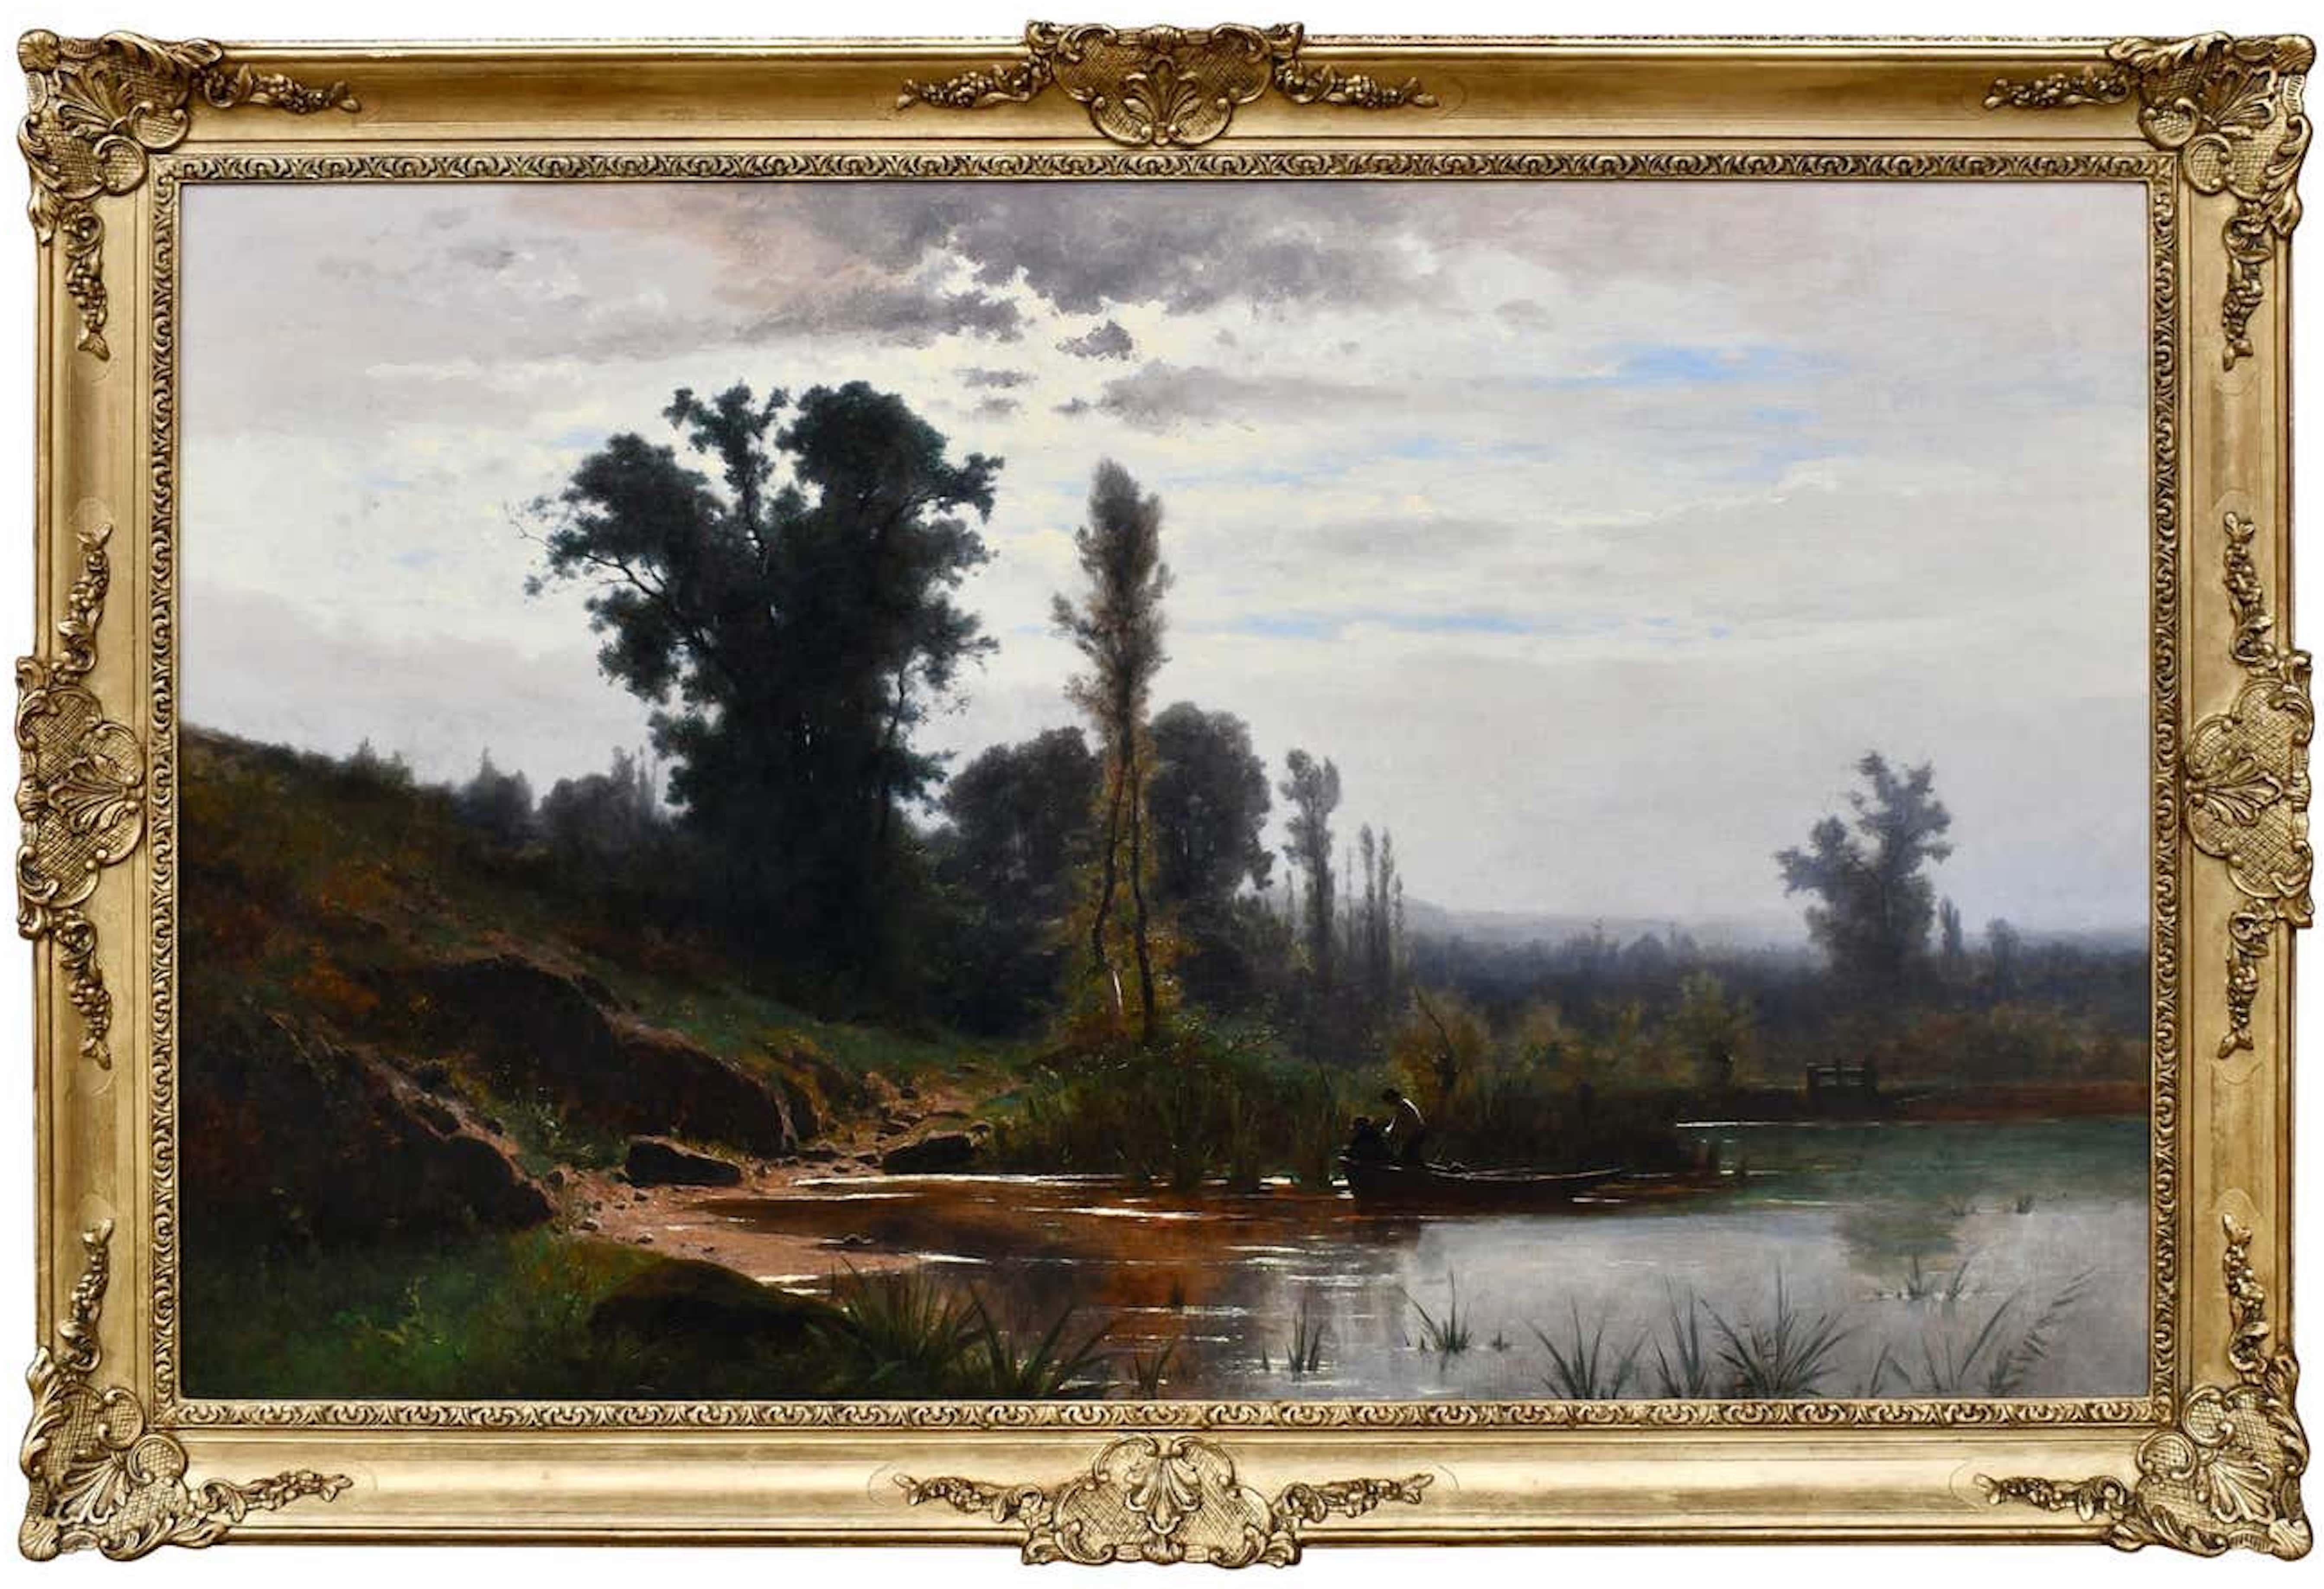 On the River Bank